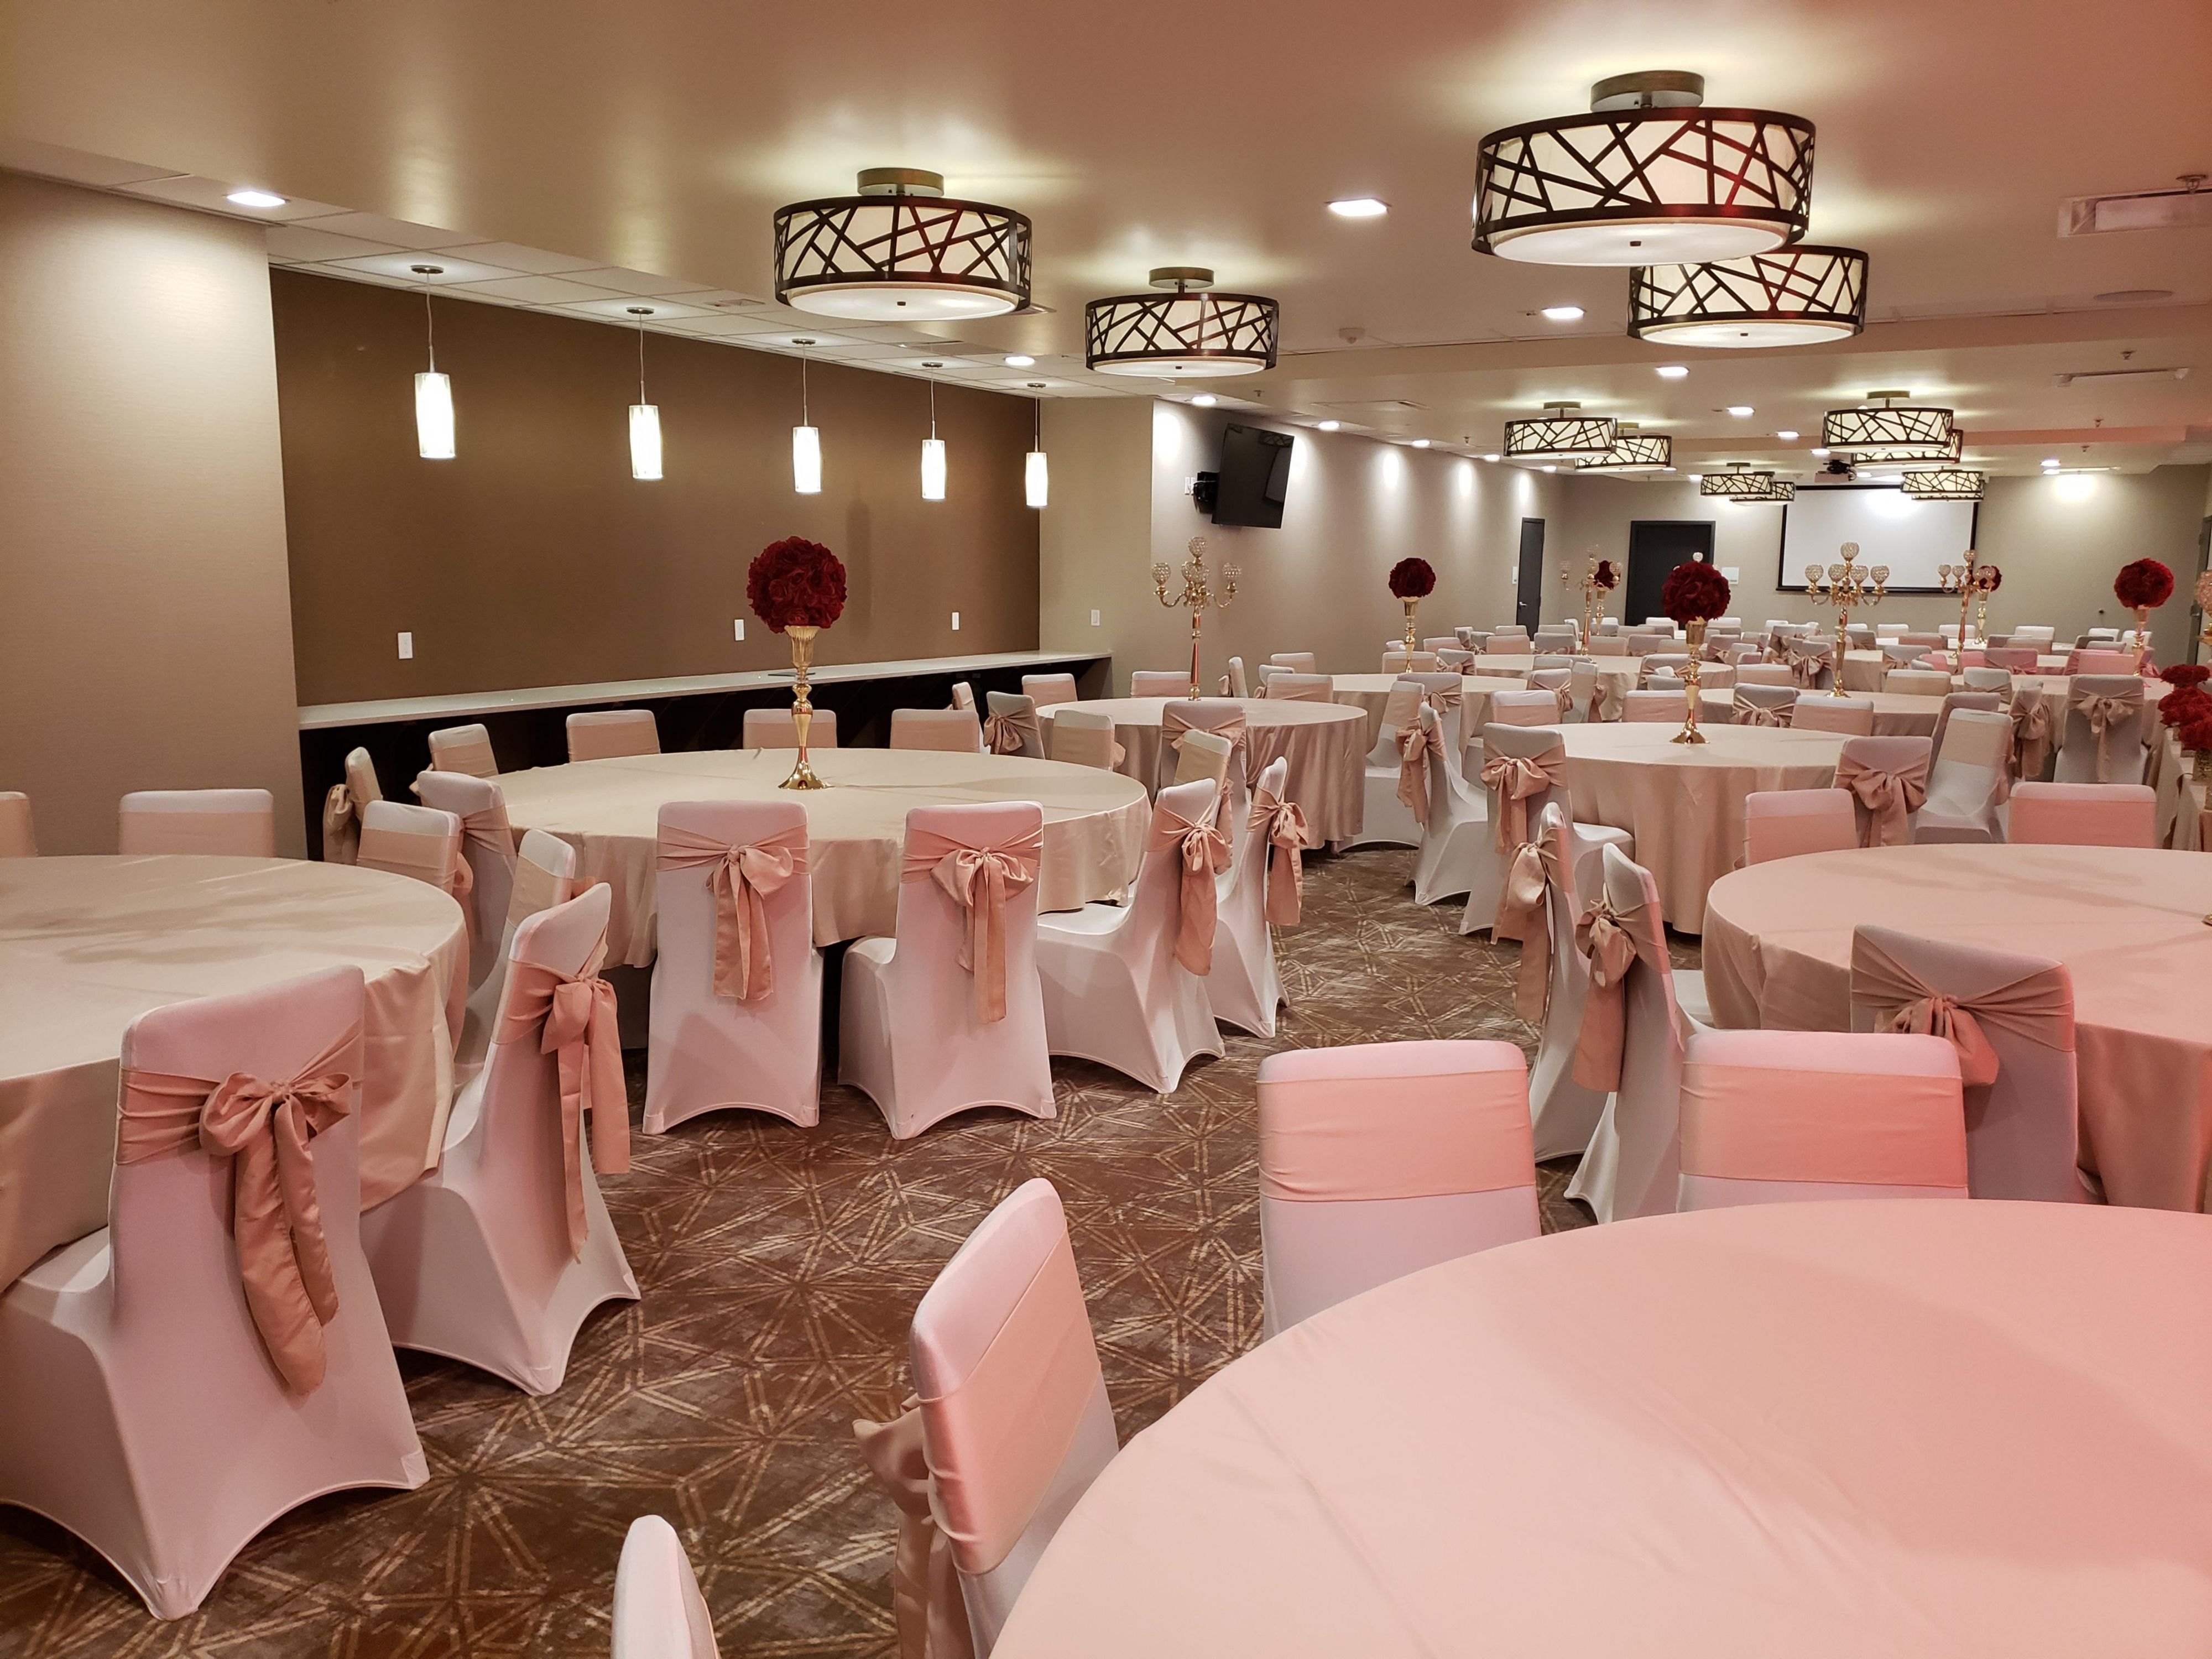 Our hotel features 8,500 sq. ft. of modern meeting space for your banquet or meeting’s needs for up to 350 individuals. We have a wide variety of catering options. Let us host your next event.